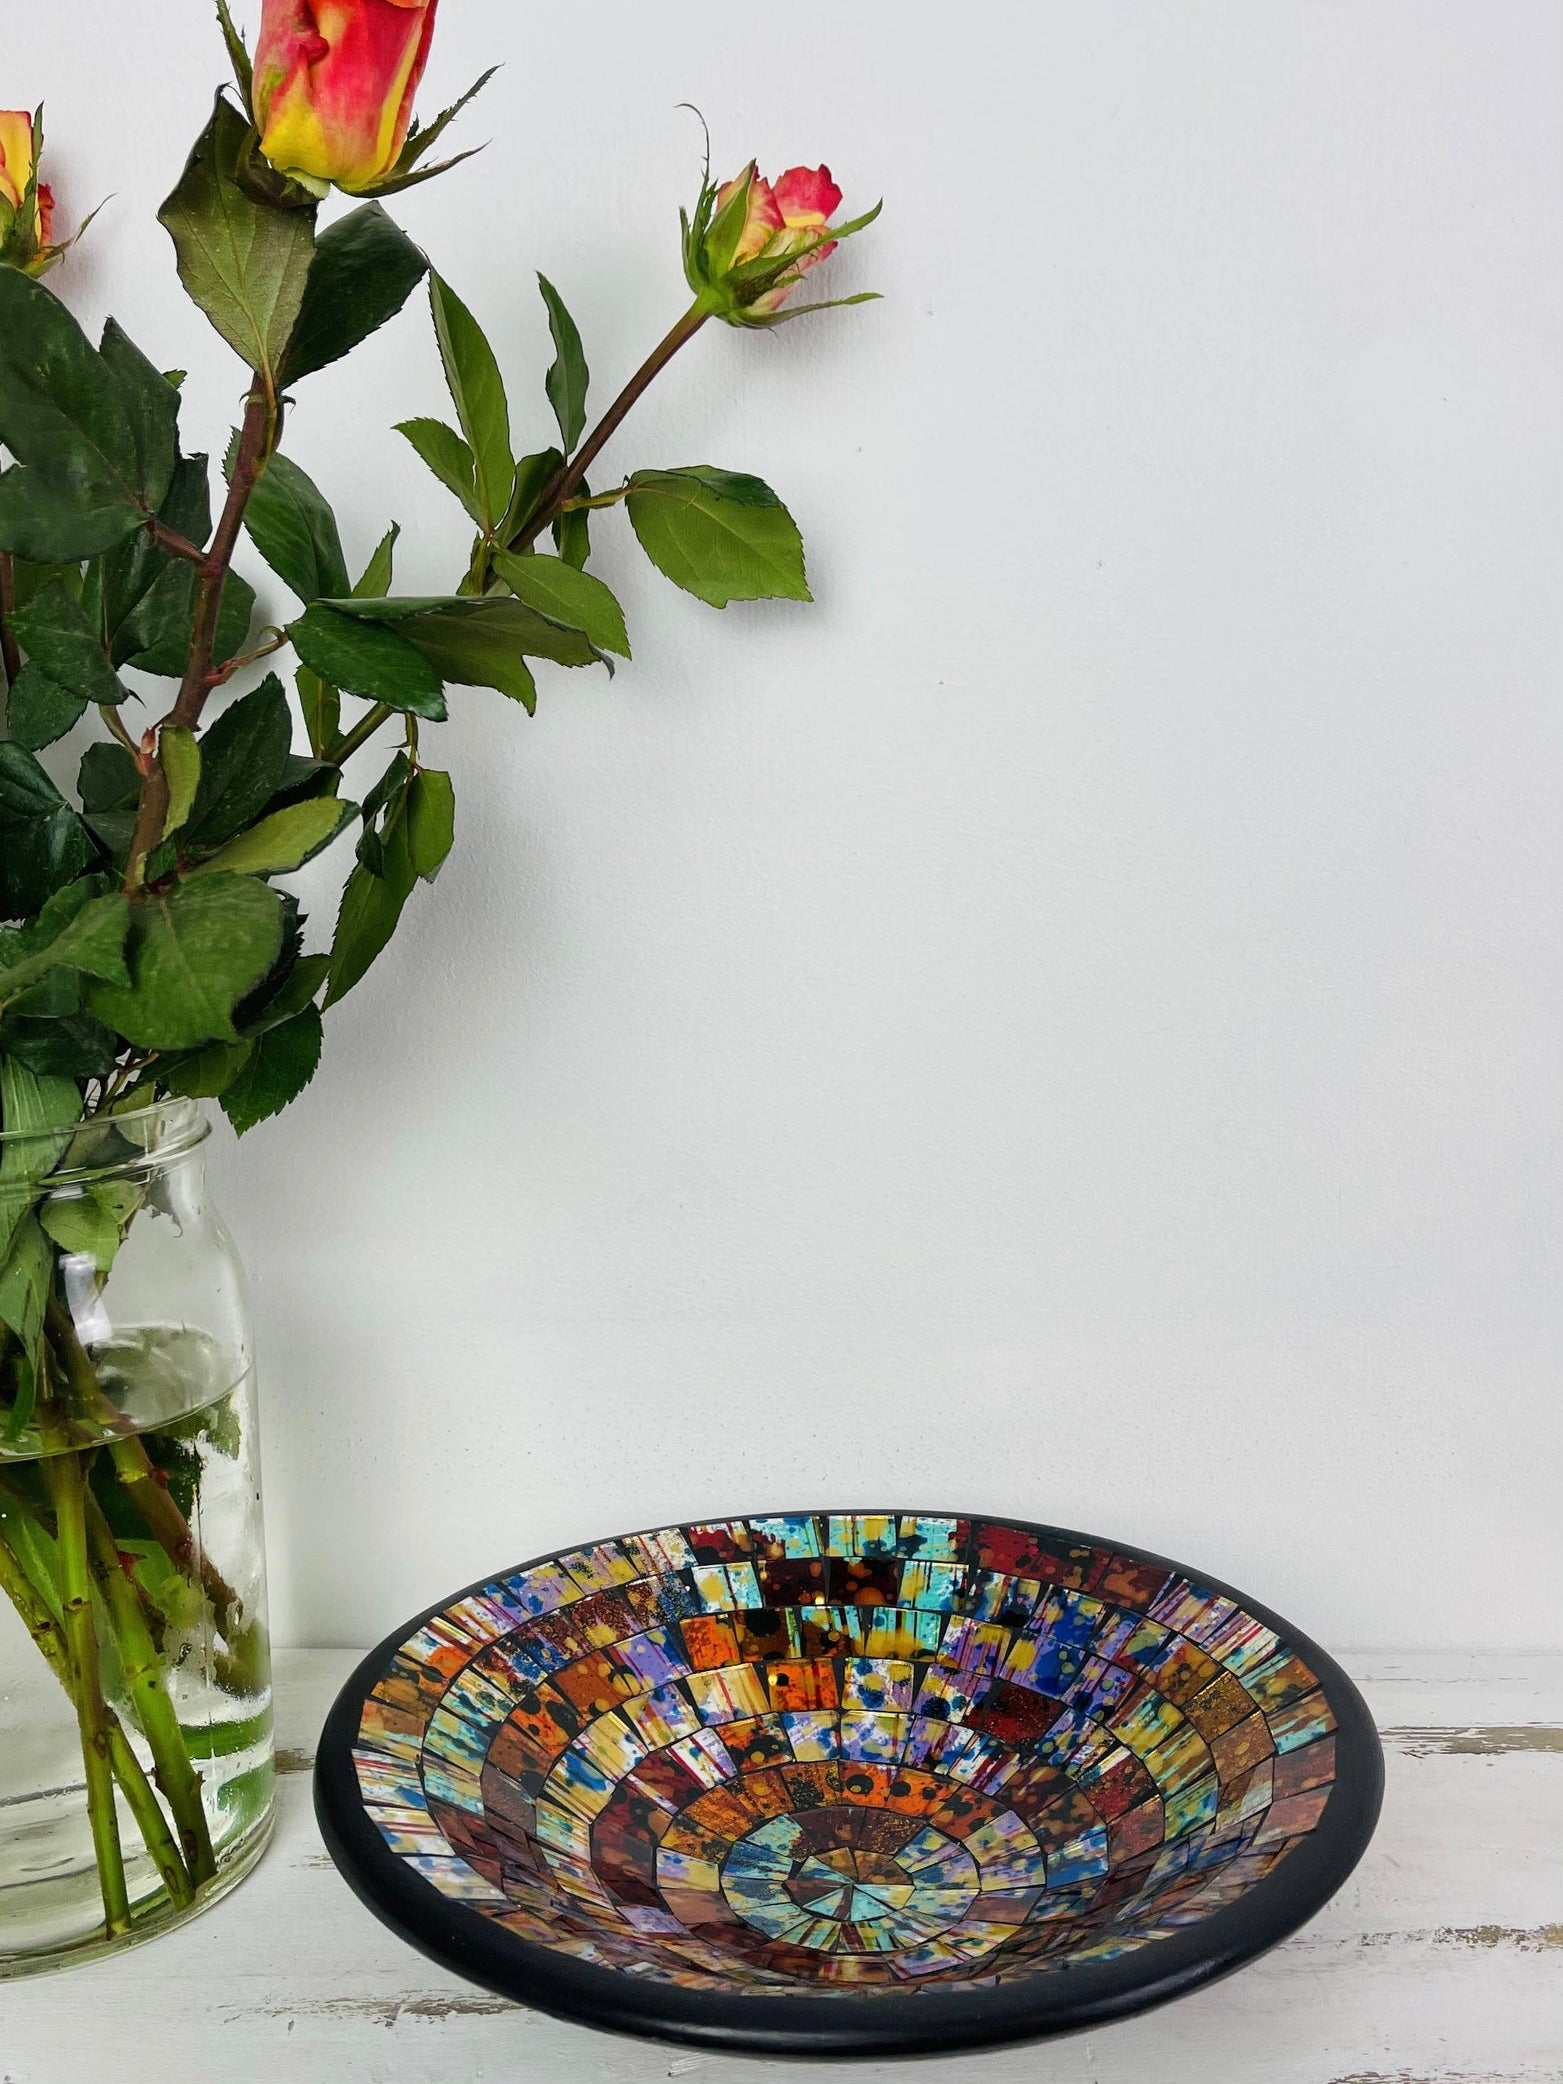 mosaic bowl front view with a vase of flowers next